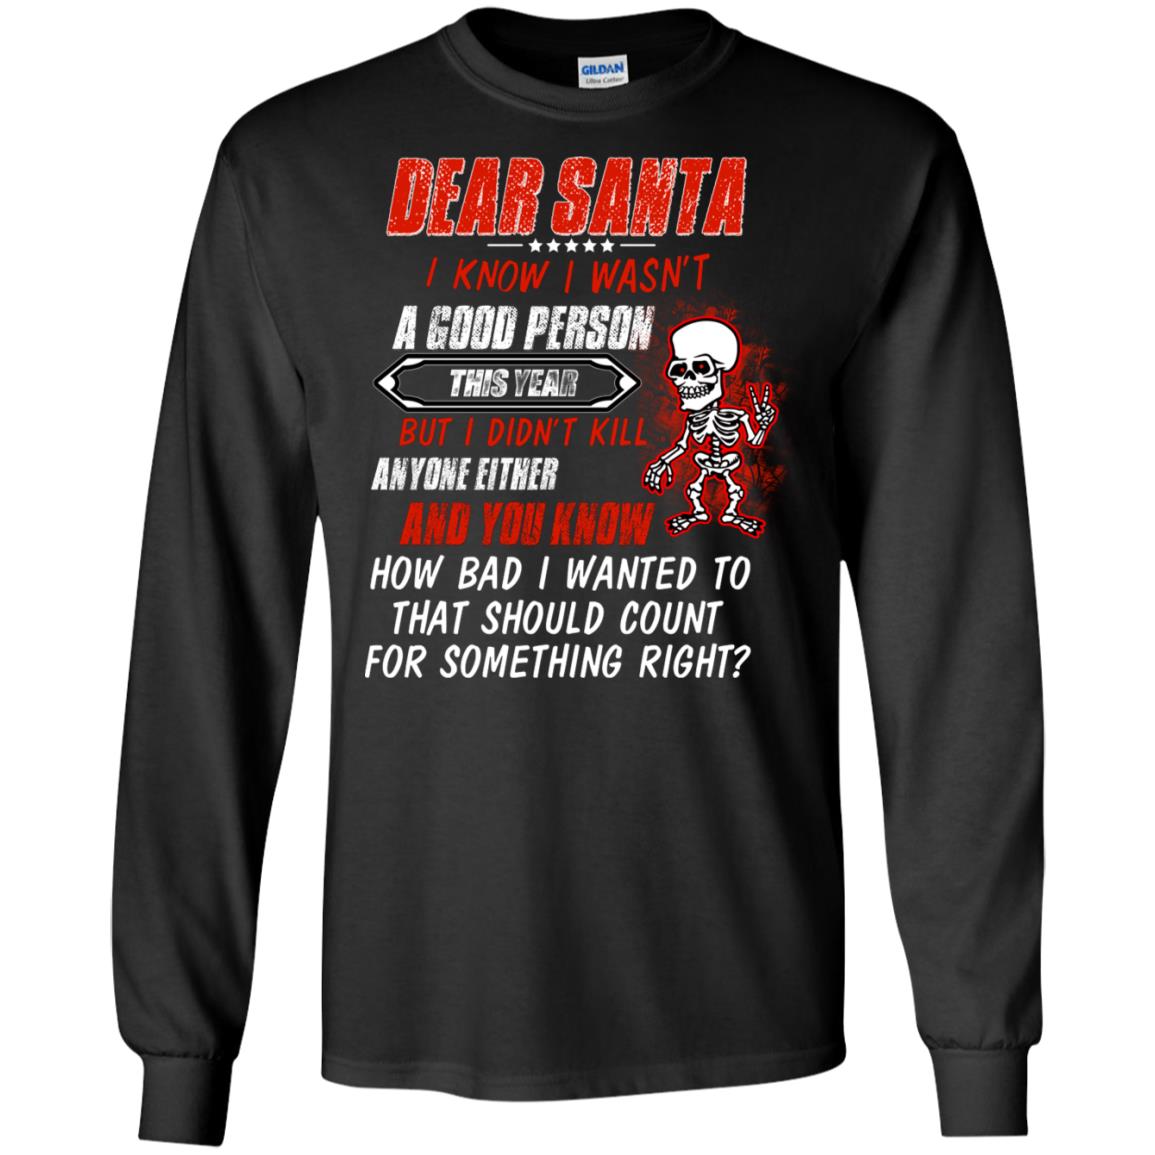 Dear Santa I Know I Wasn't A Good Person This Year But I Didn't Kill Anyone Either And You Know How Bad I Wanted To That Should Count For Something RightG240 Gildan LS Ultra Cotton T-Shirt